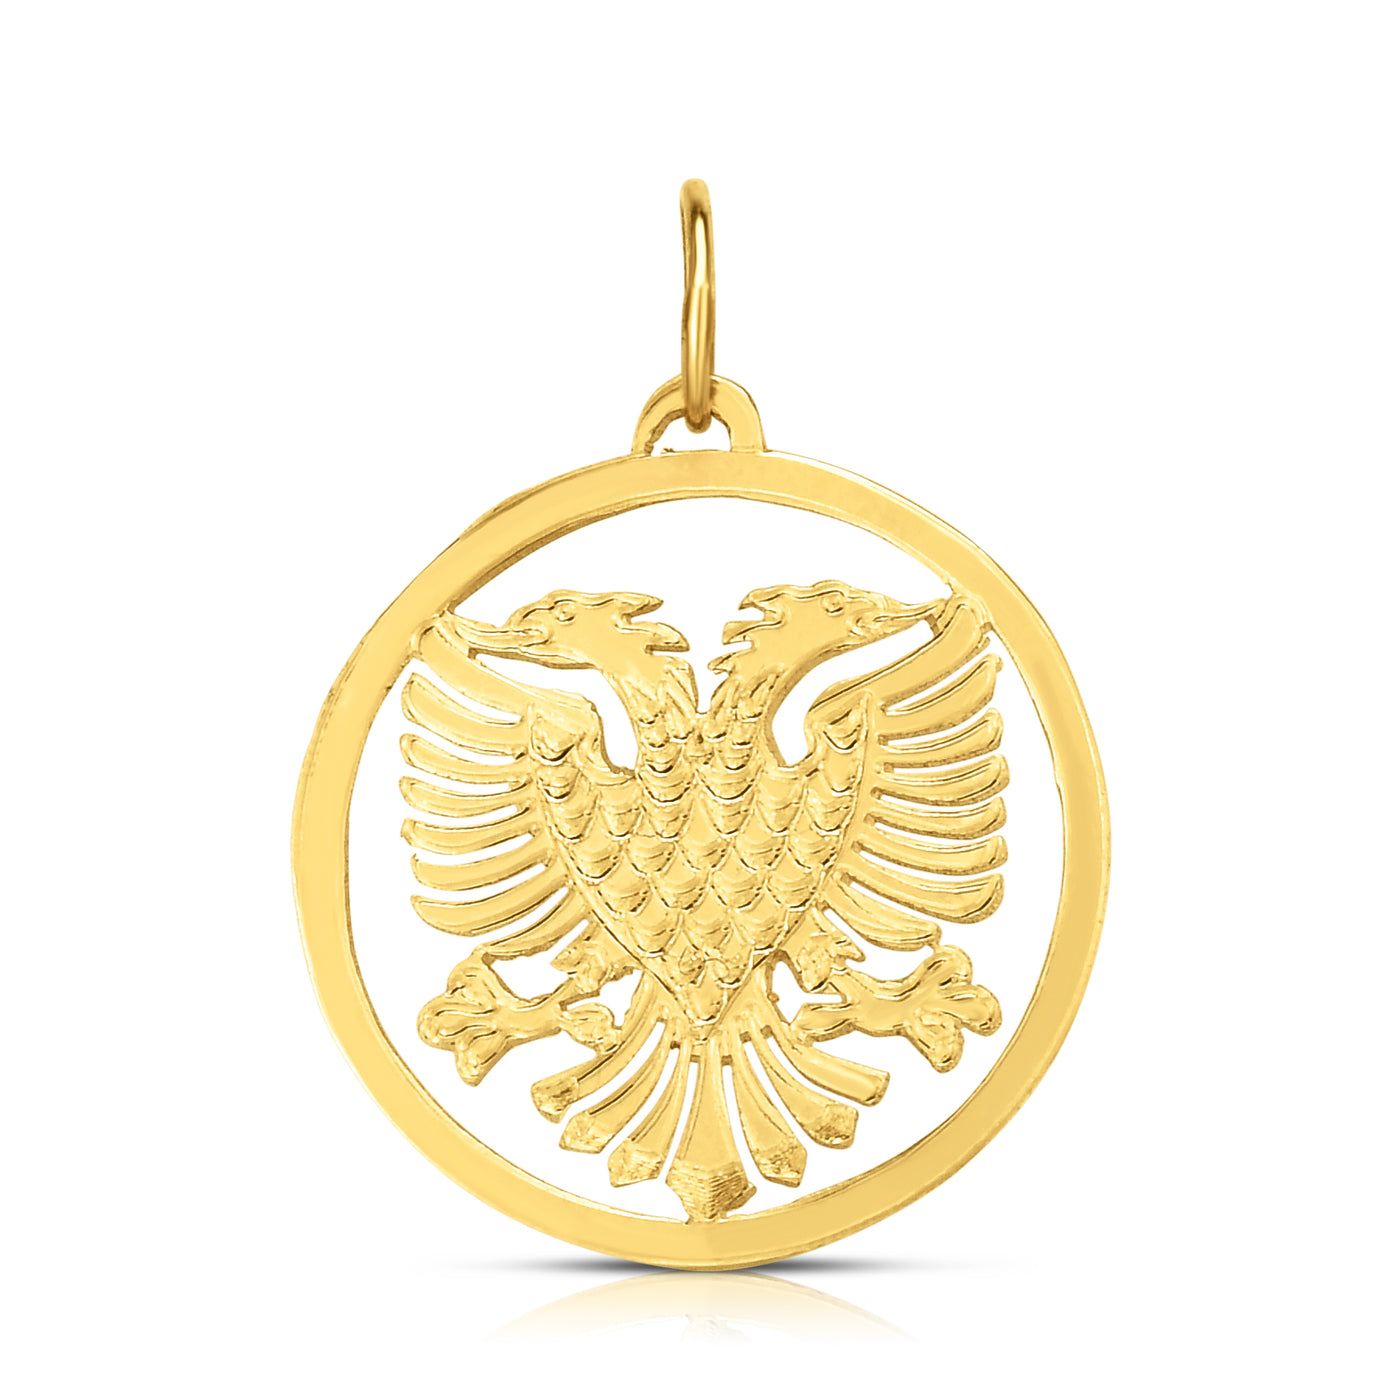 SHQIPONJA - The Round Enclosed Two Headed Eagle